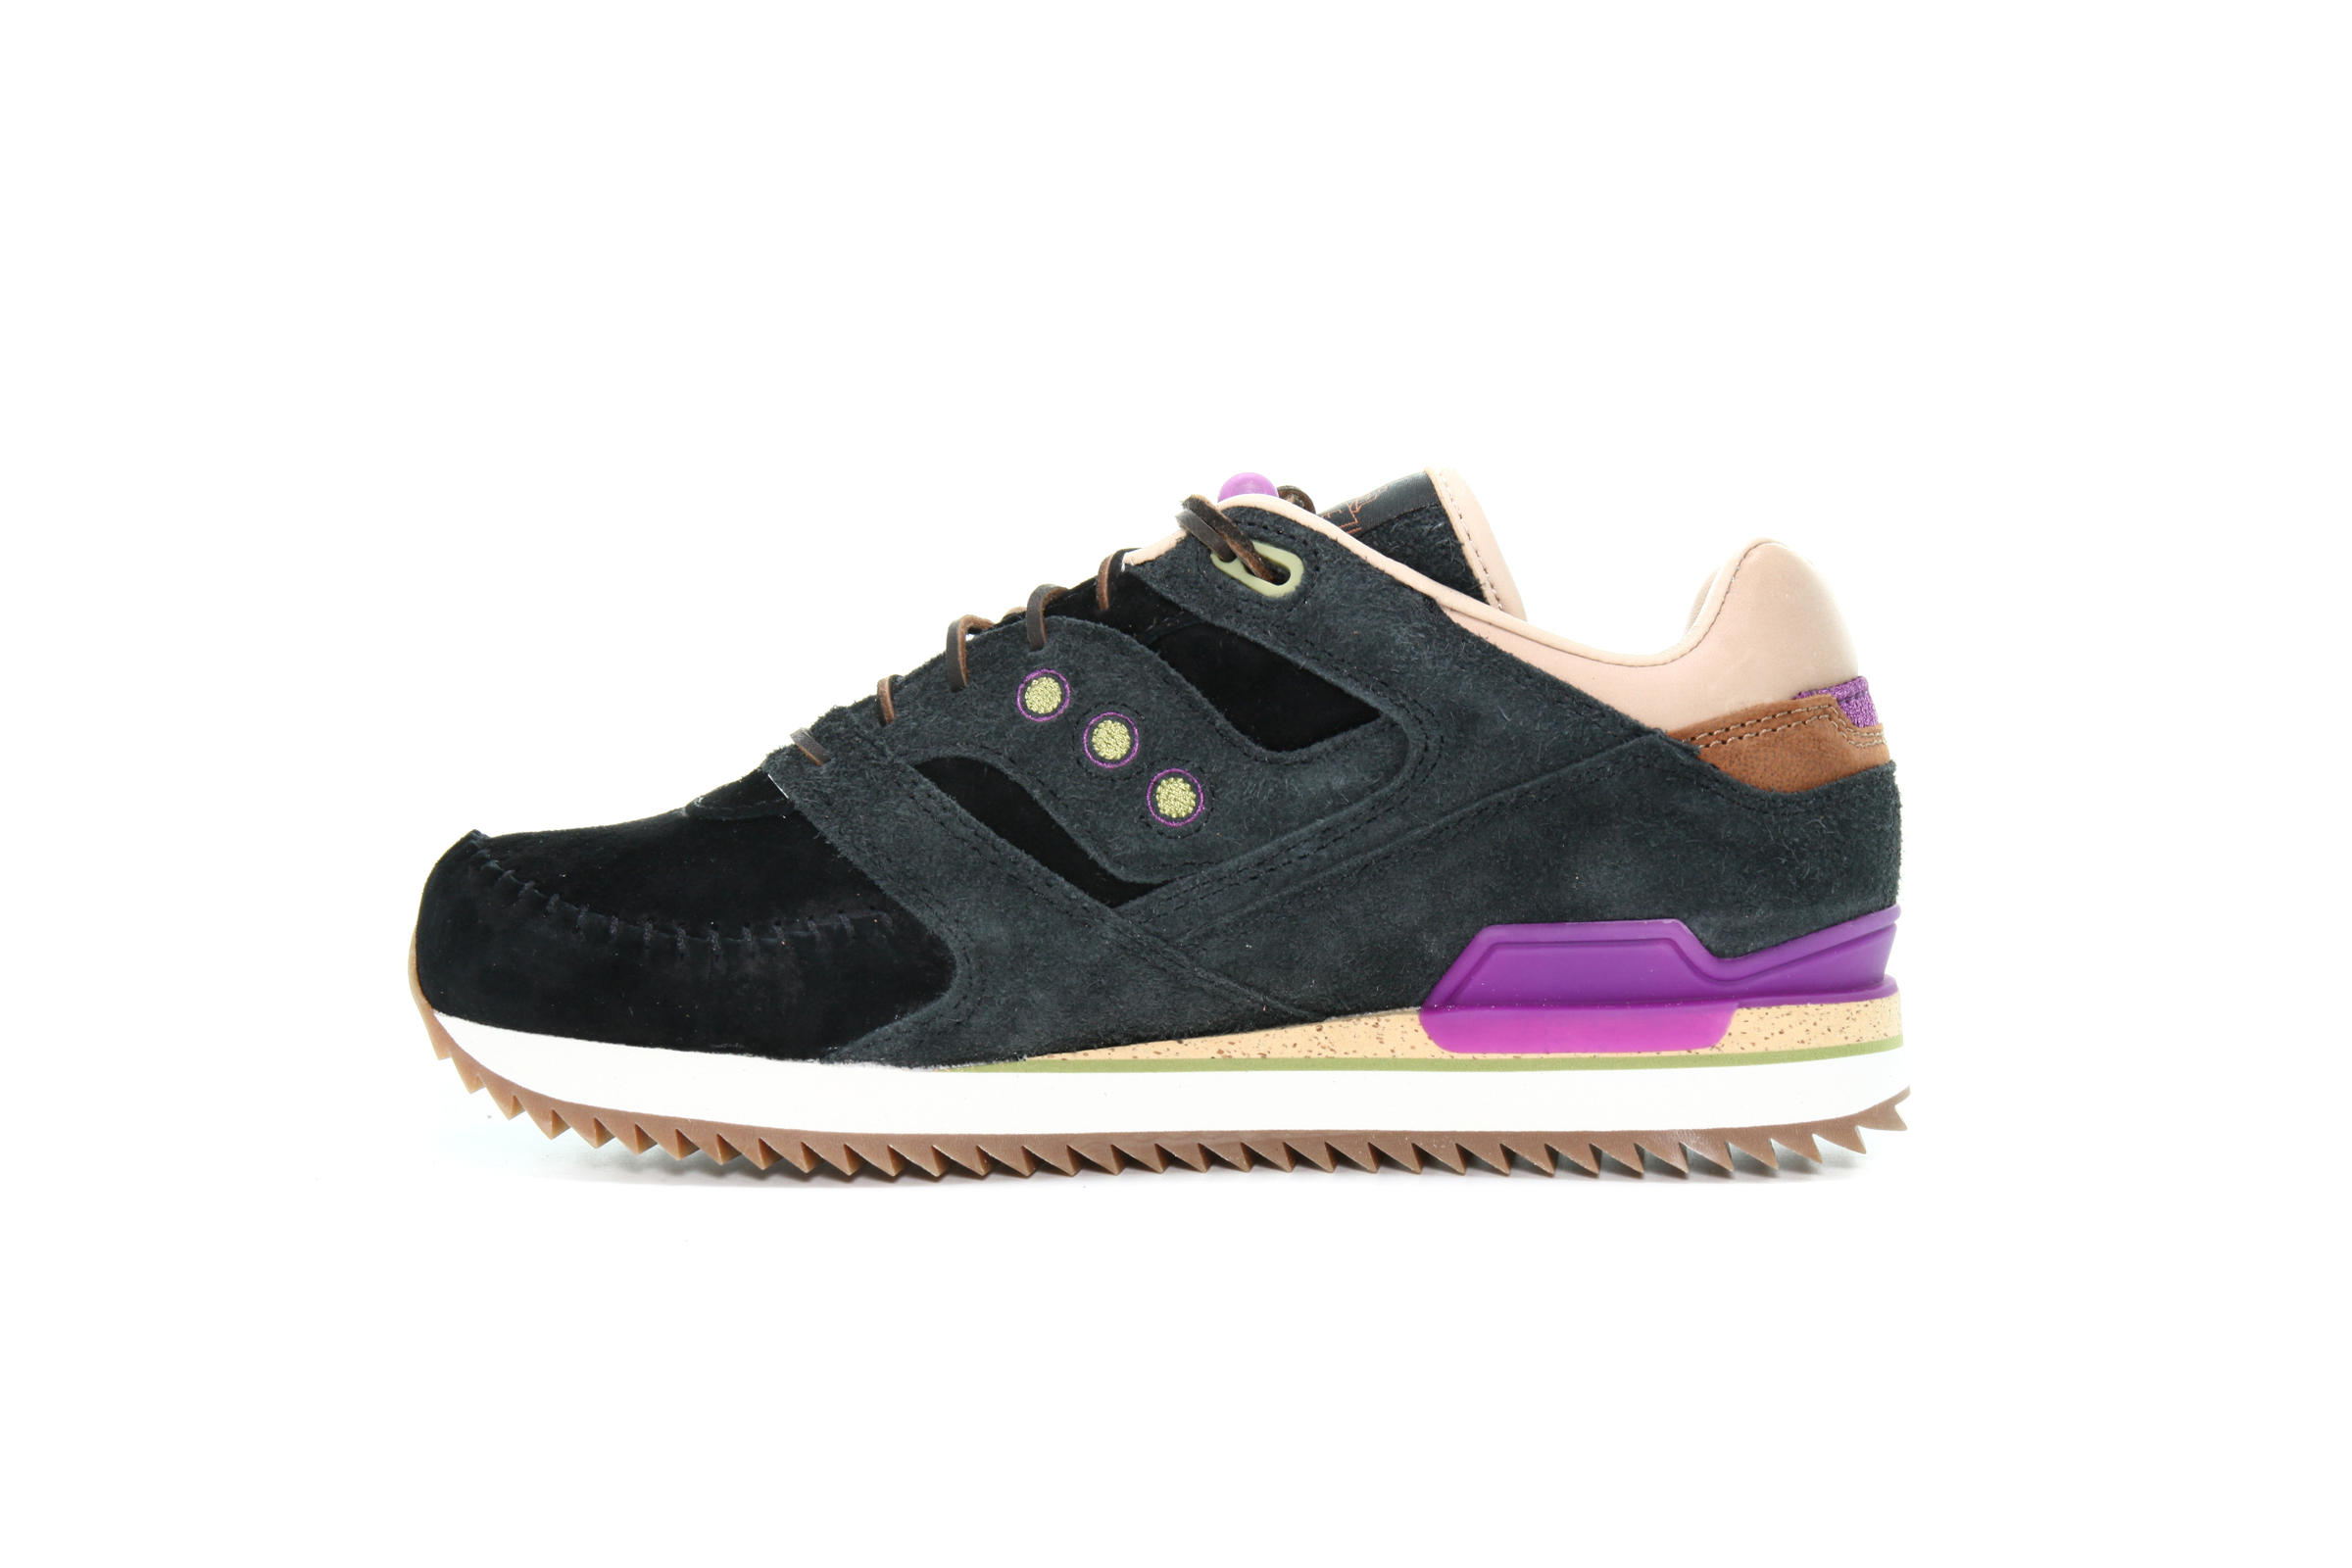 Saucony x LAPSTONE & HAMMER COURAGEOUS MOC "TWO RIVERS"